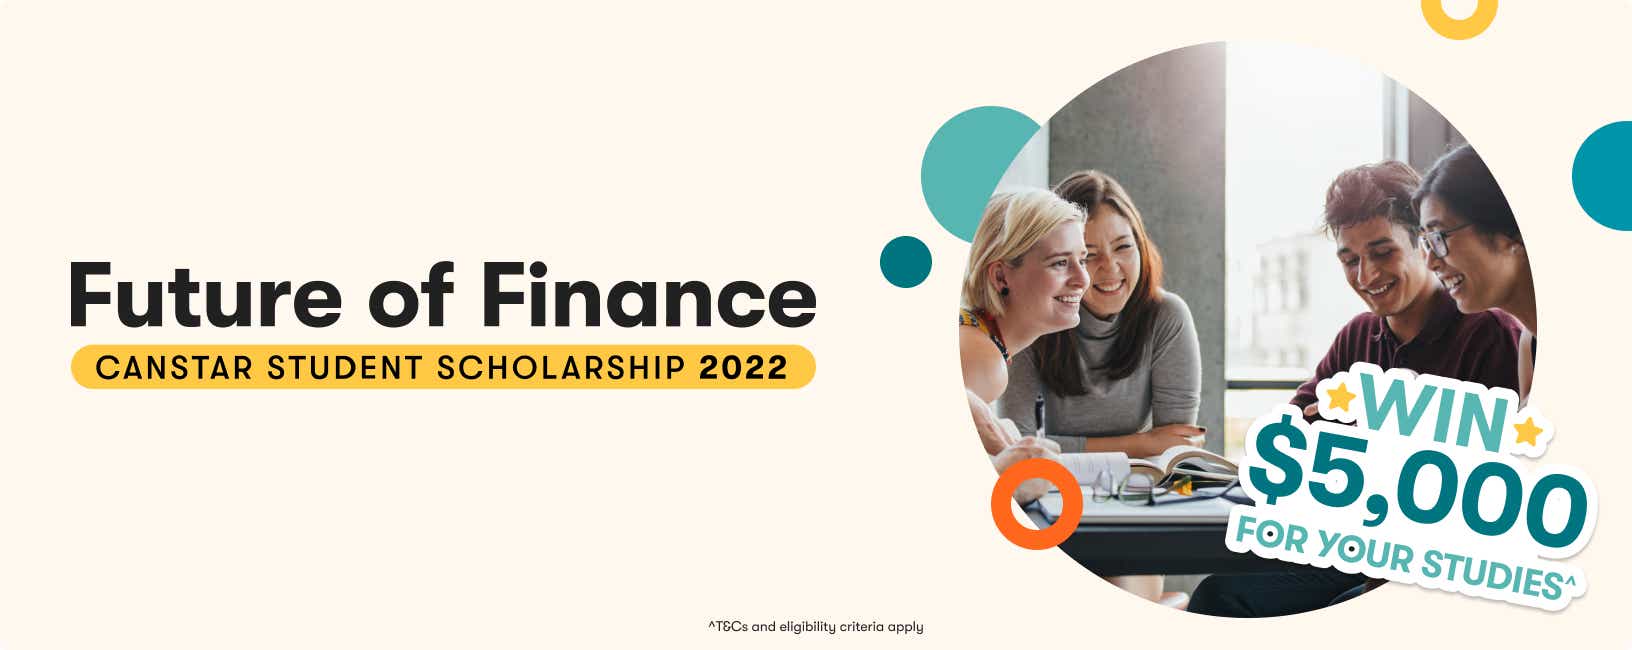 Canstar Future of Finance Scholarship